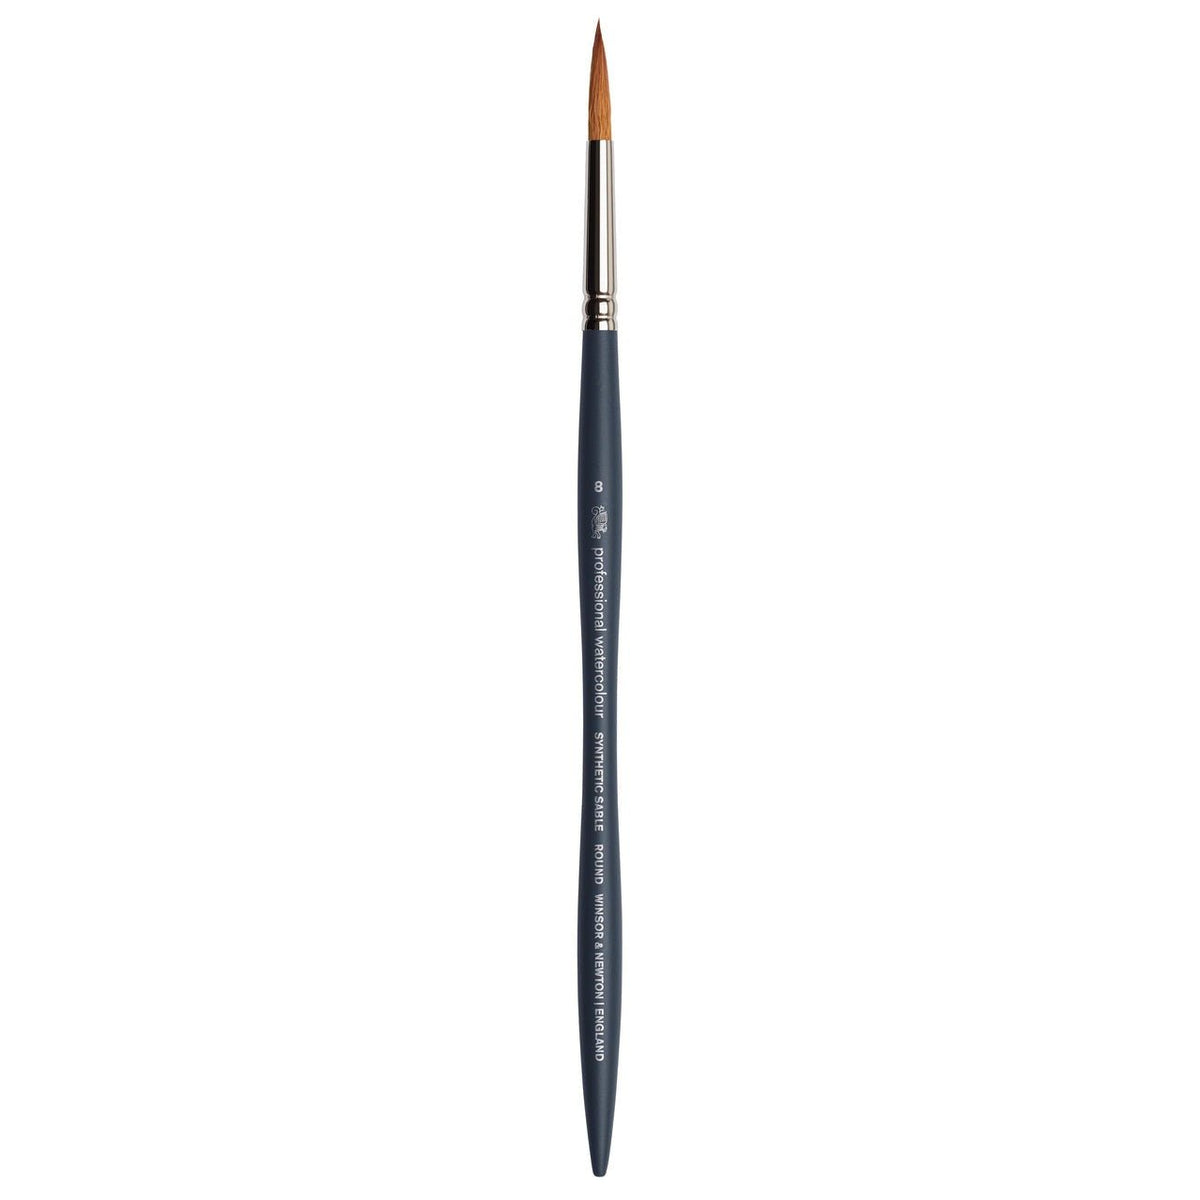 Winsor & Newton Professional Watercolor Synthetic Sable Brush - Round 8 - merriartist.com